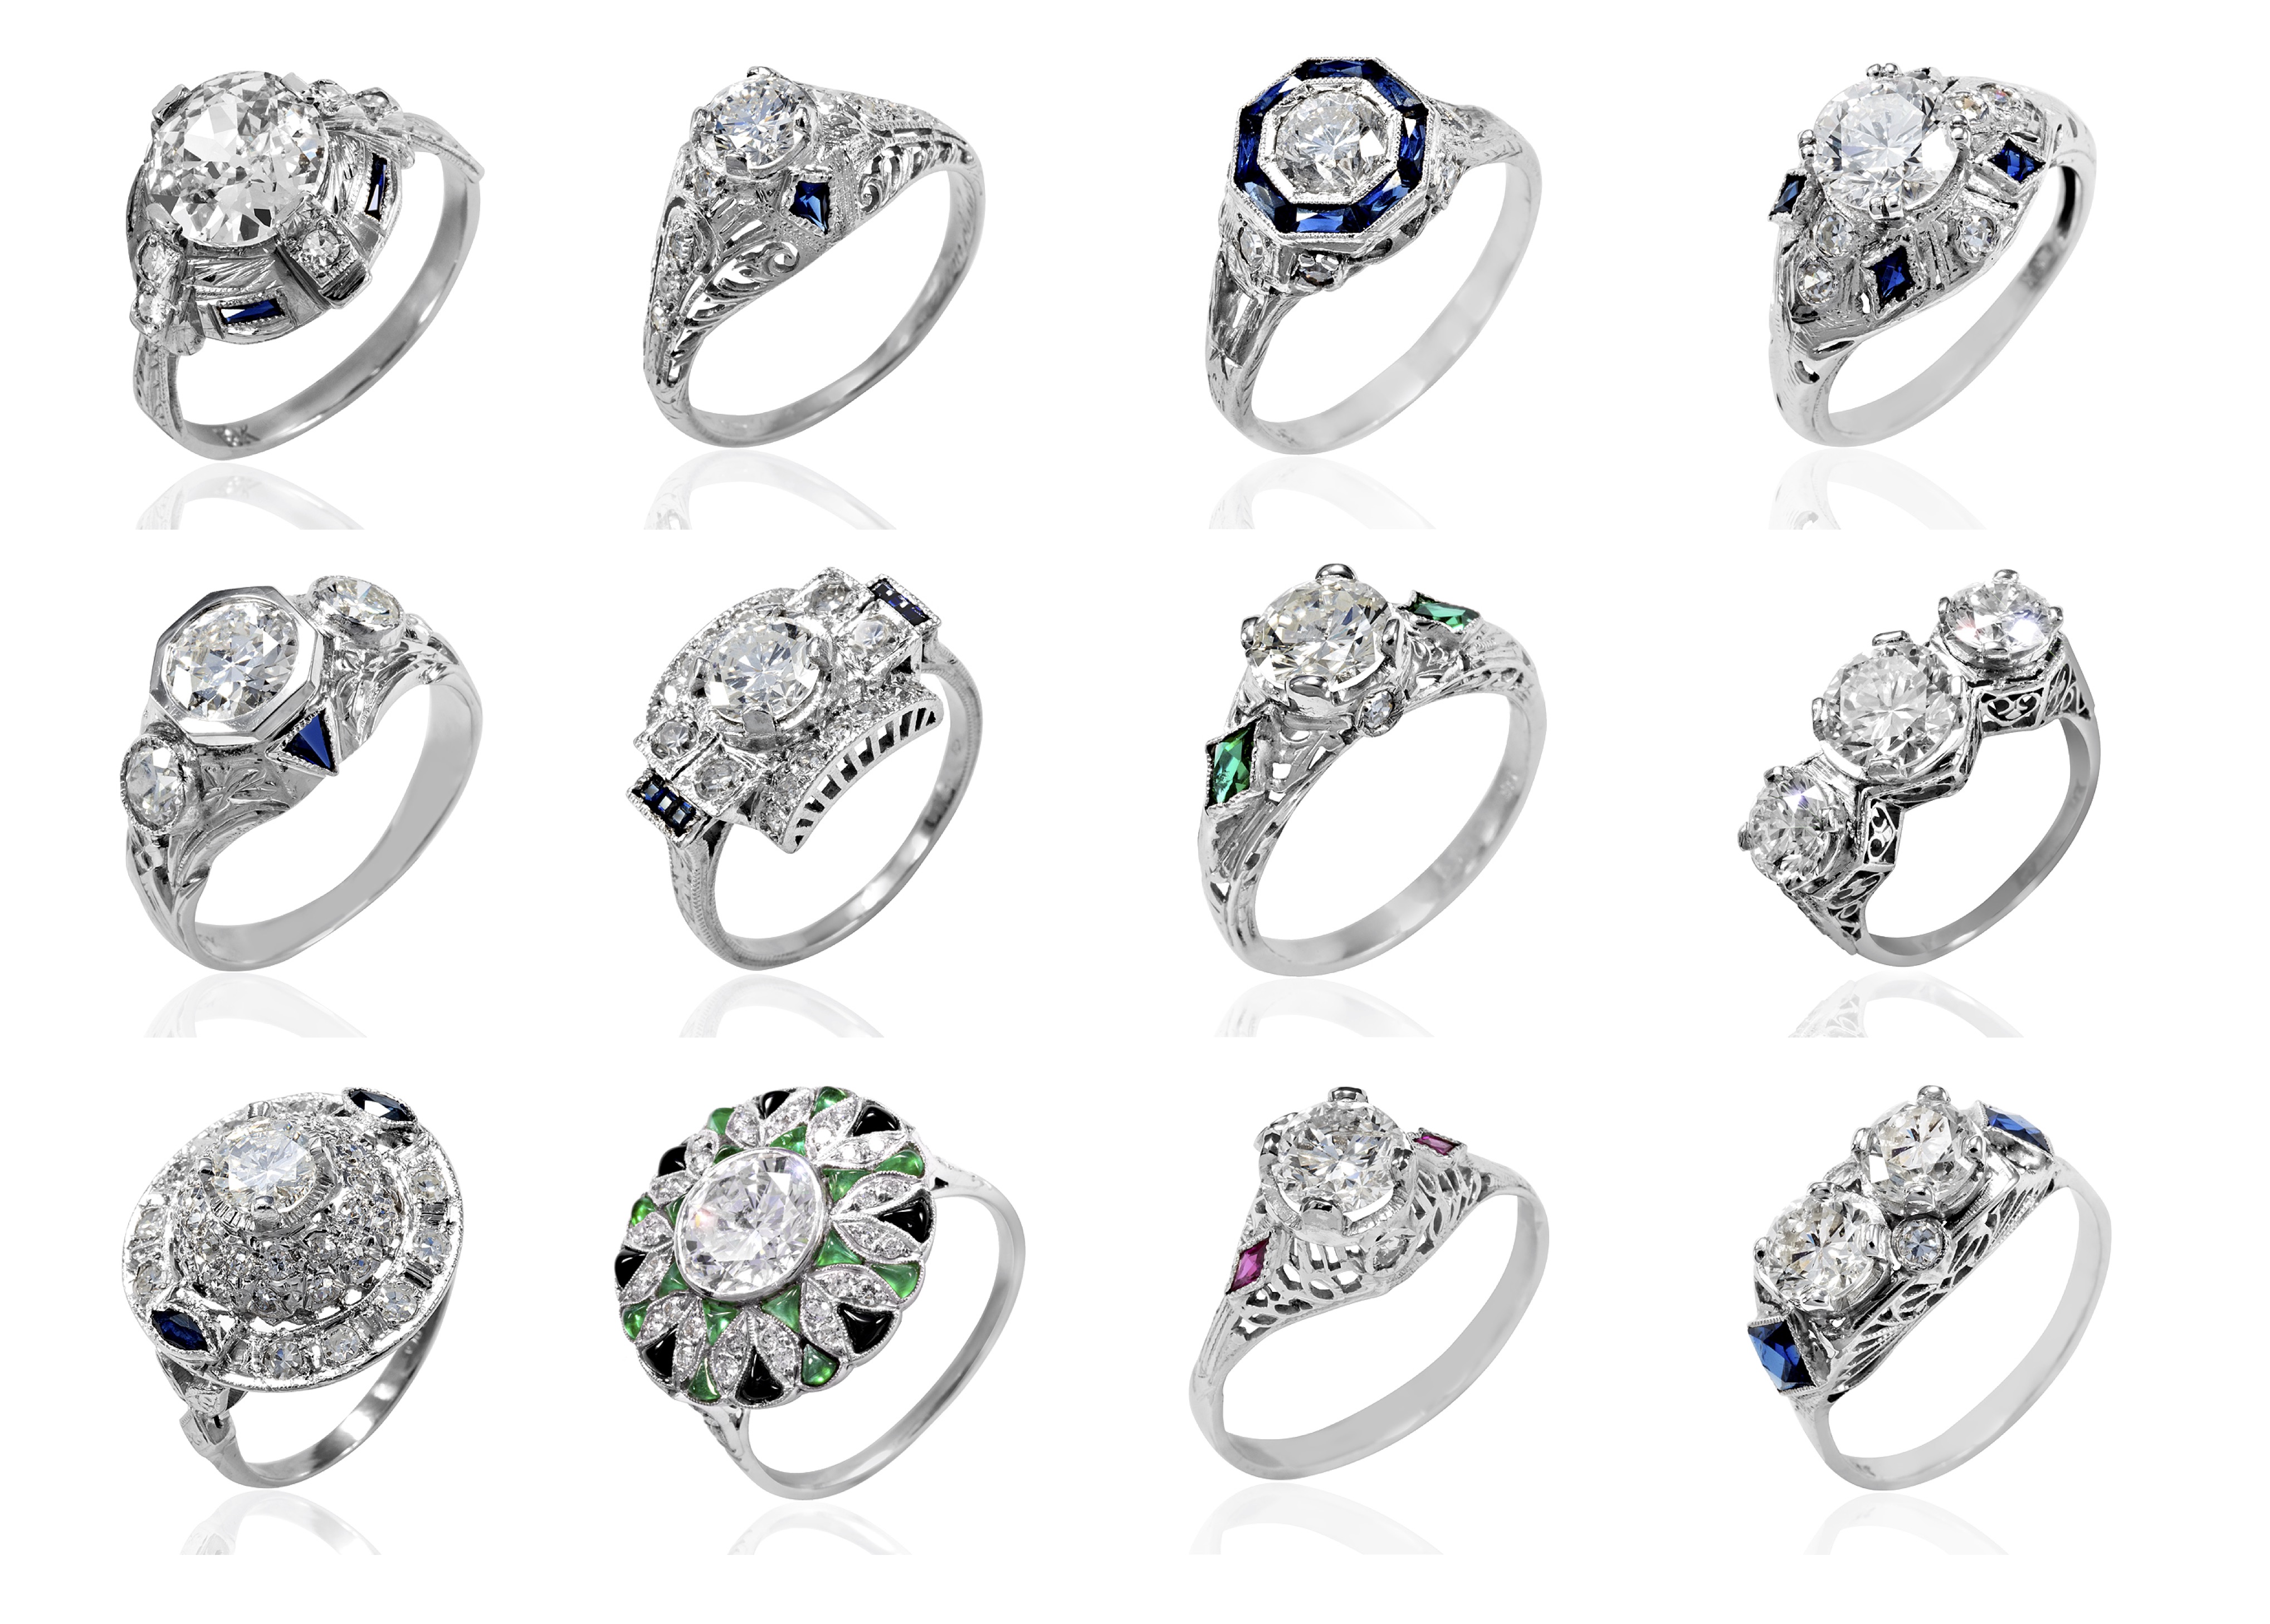 Estate Jewelry Engagement Rings